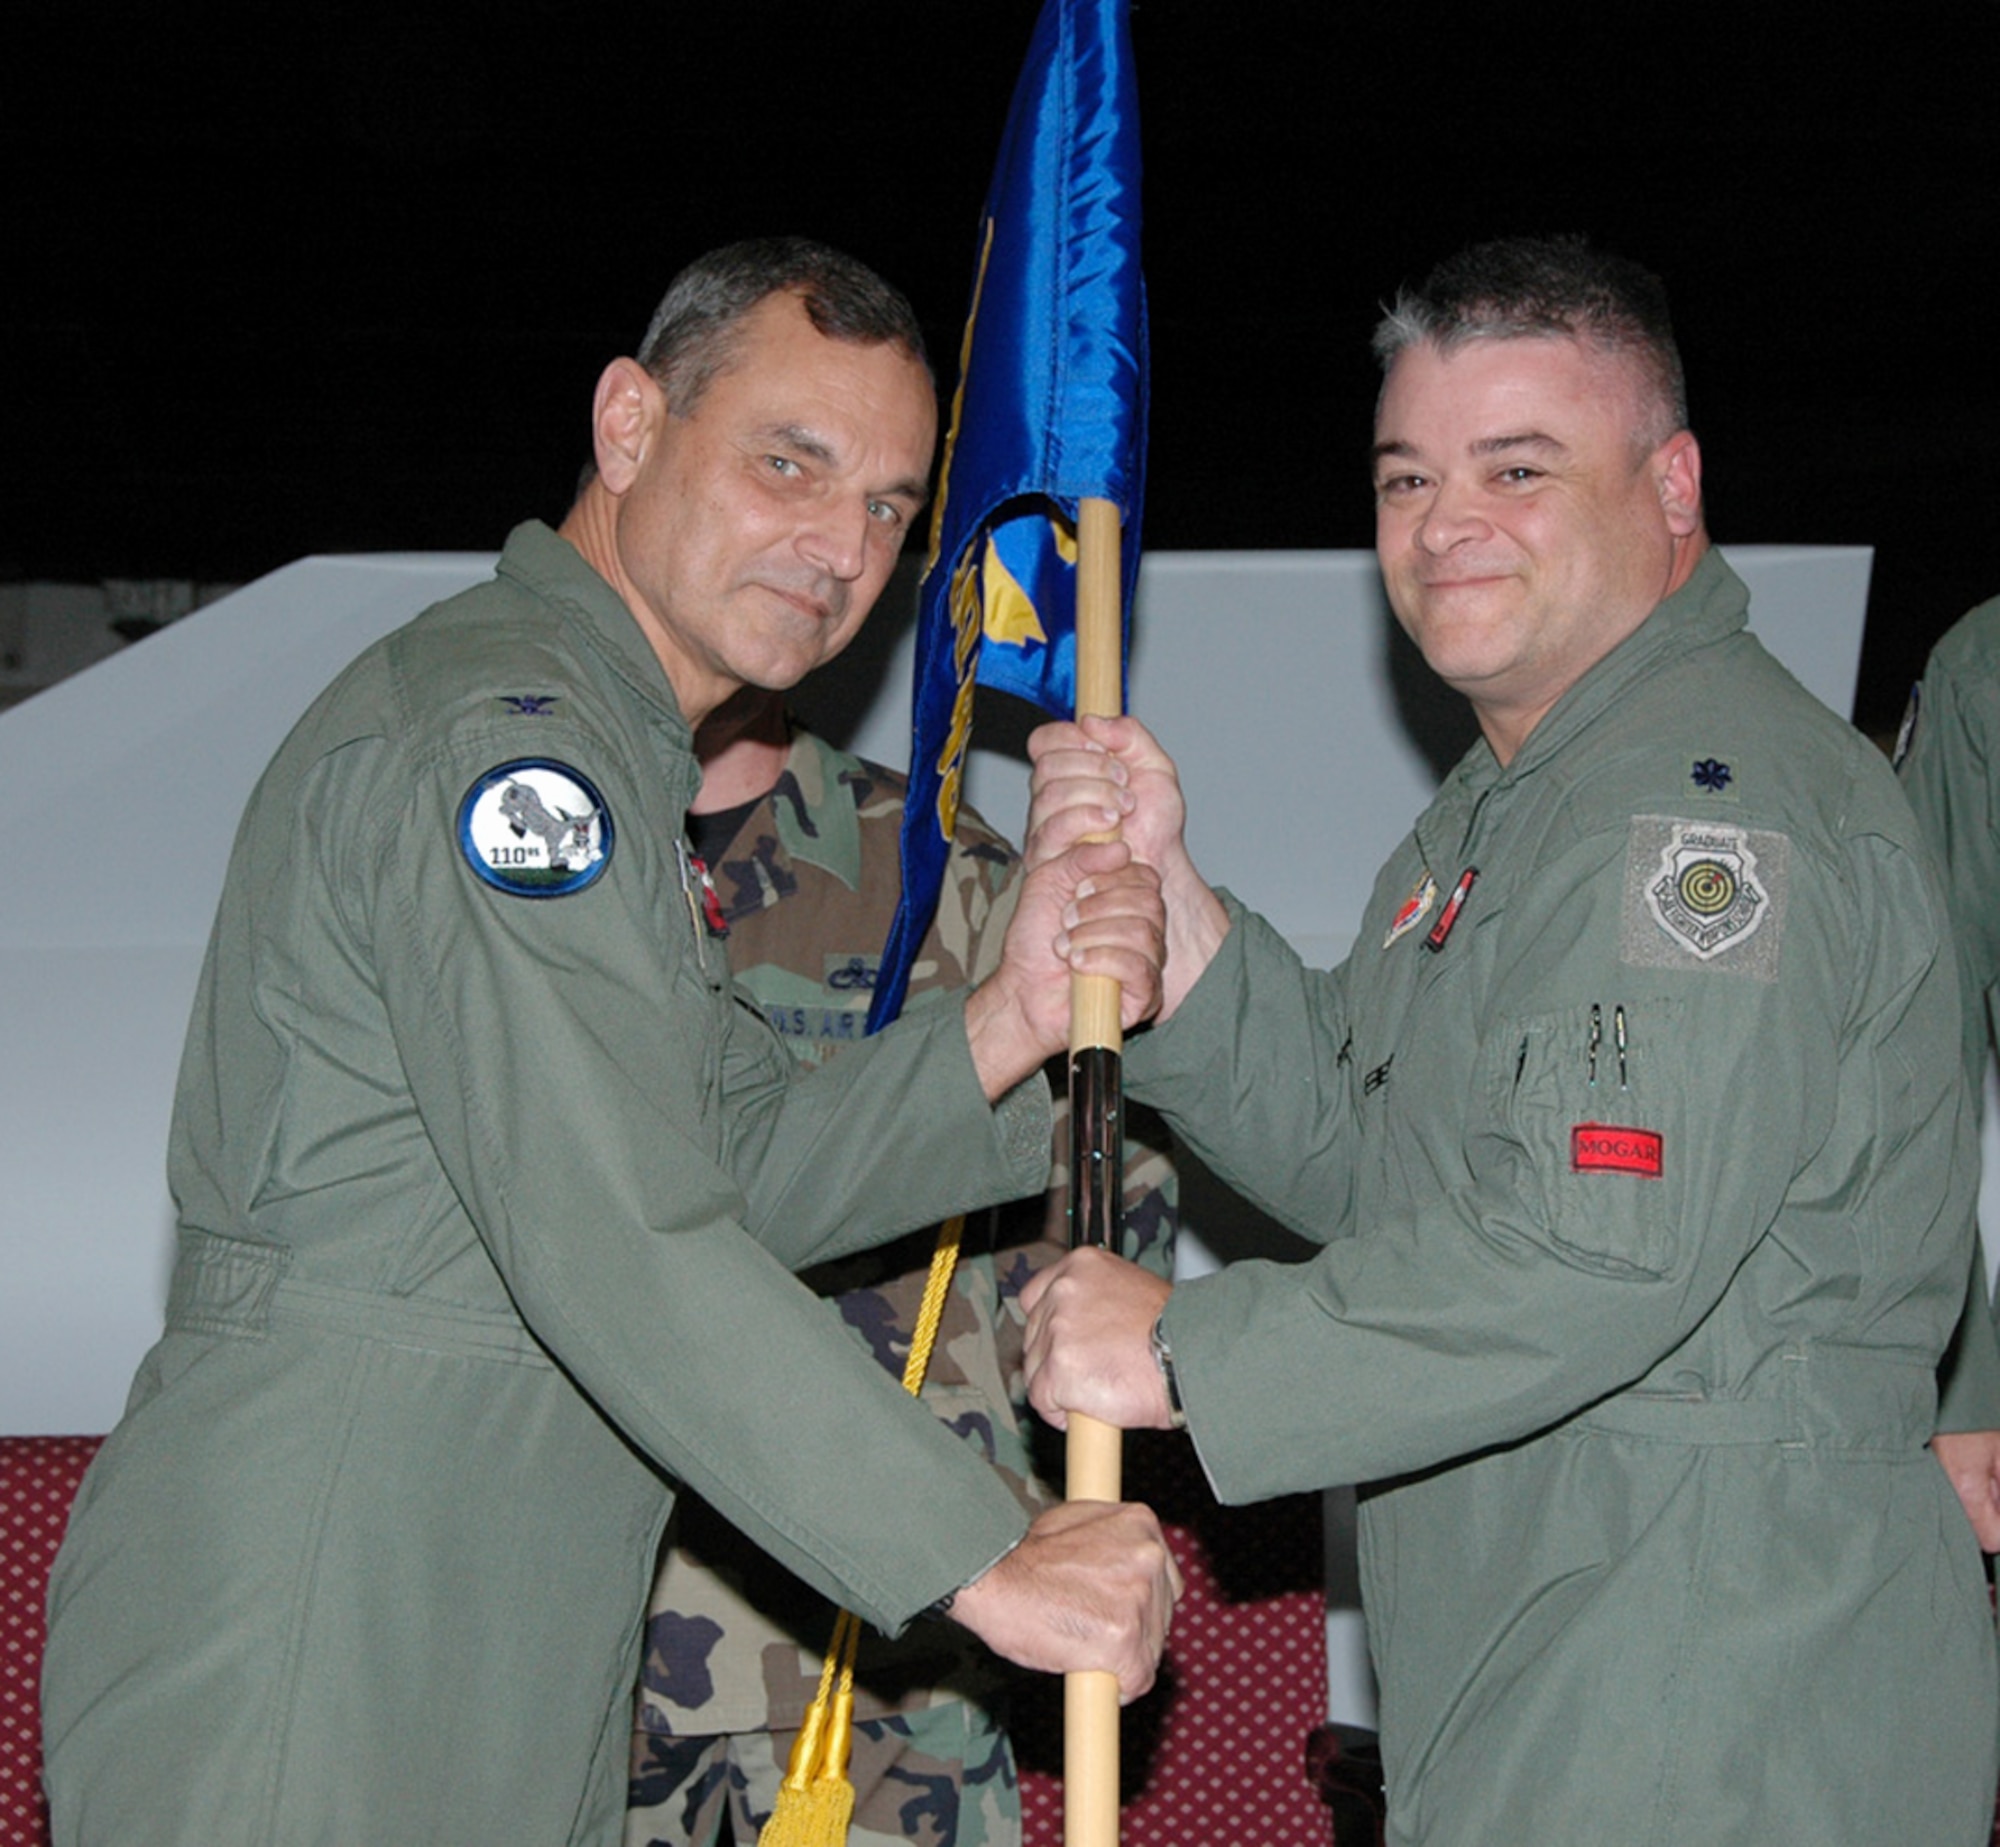 Col. Robert Leeker, 131st Bomb Wing commander, presents the gideon to Lt. Col. Kenneth "Willie B" Eaves, former 131st Fighter Wing chief of plans and programs and total force integration officer, to signify Colonel Eaves assumption of command of the 110th Bomb Squadron during a ceremony at Whiteman AFB Nov. 7.  Colonel Leeker explained, the assumption of command is the first for the 131st Bomb Wing at Whiteman AFB, first of many. (Photo by Master Sgt. Mary-Dale Amison)